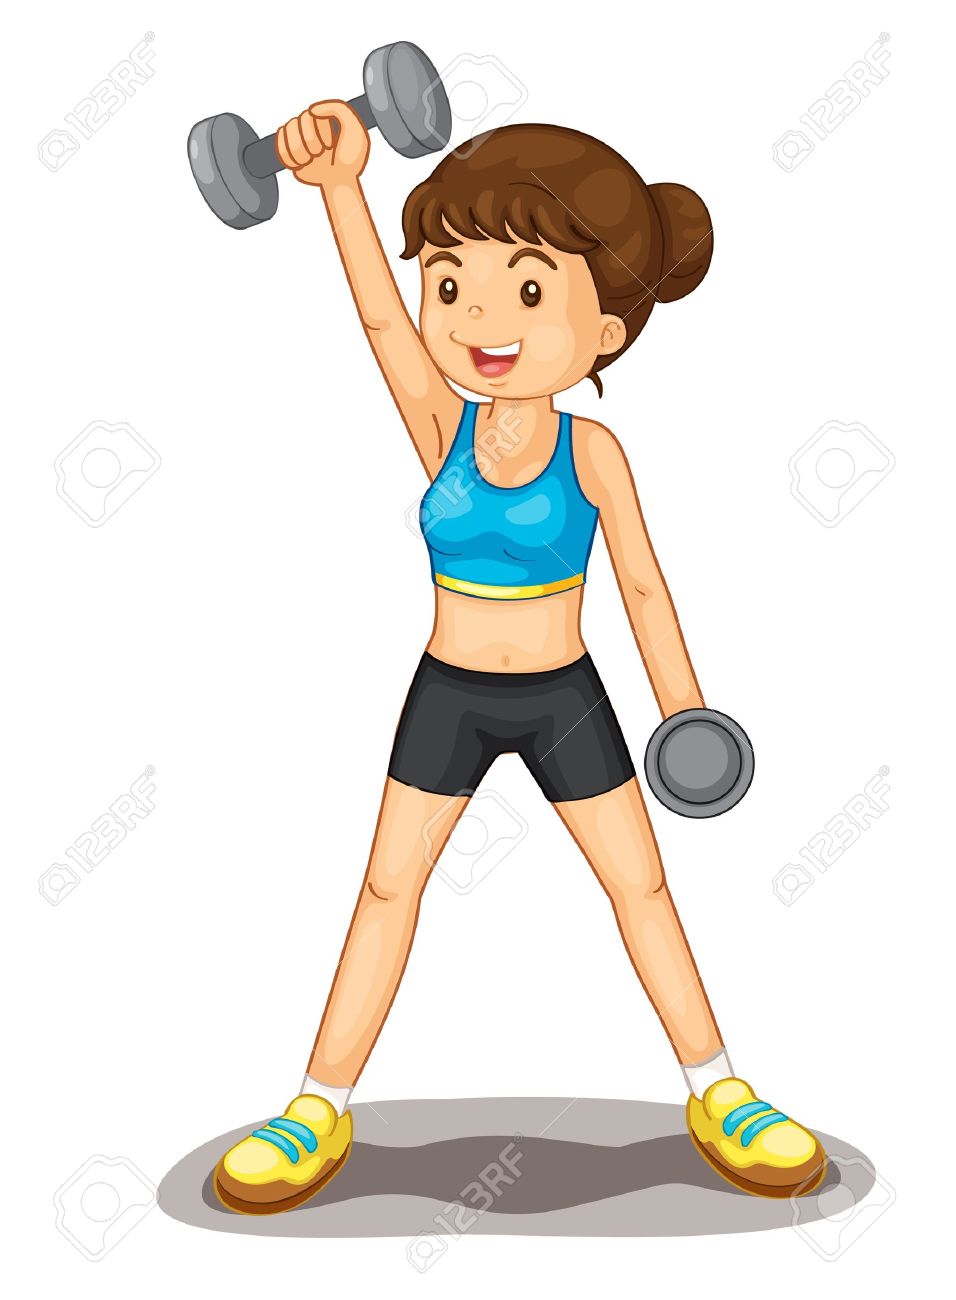 fitness animated clipart - photo #9